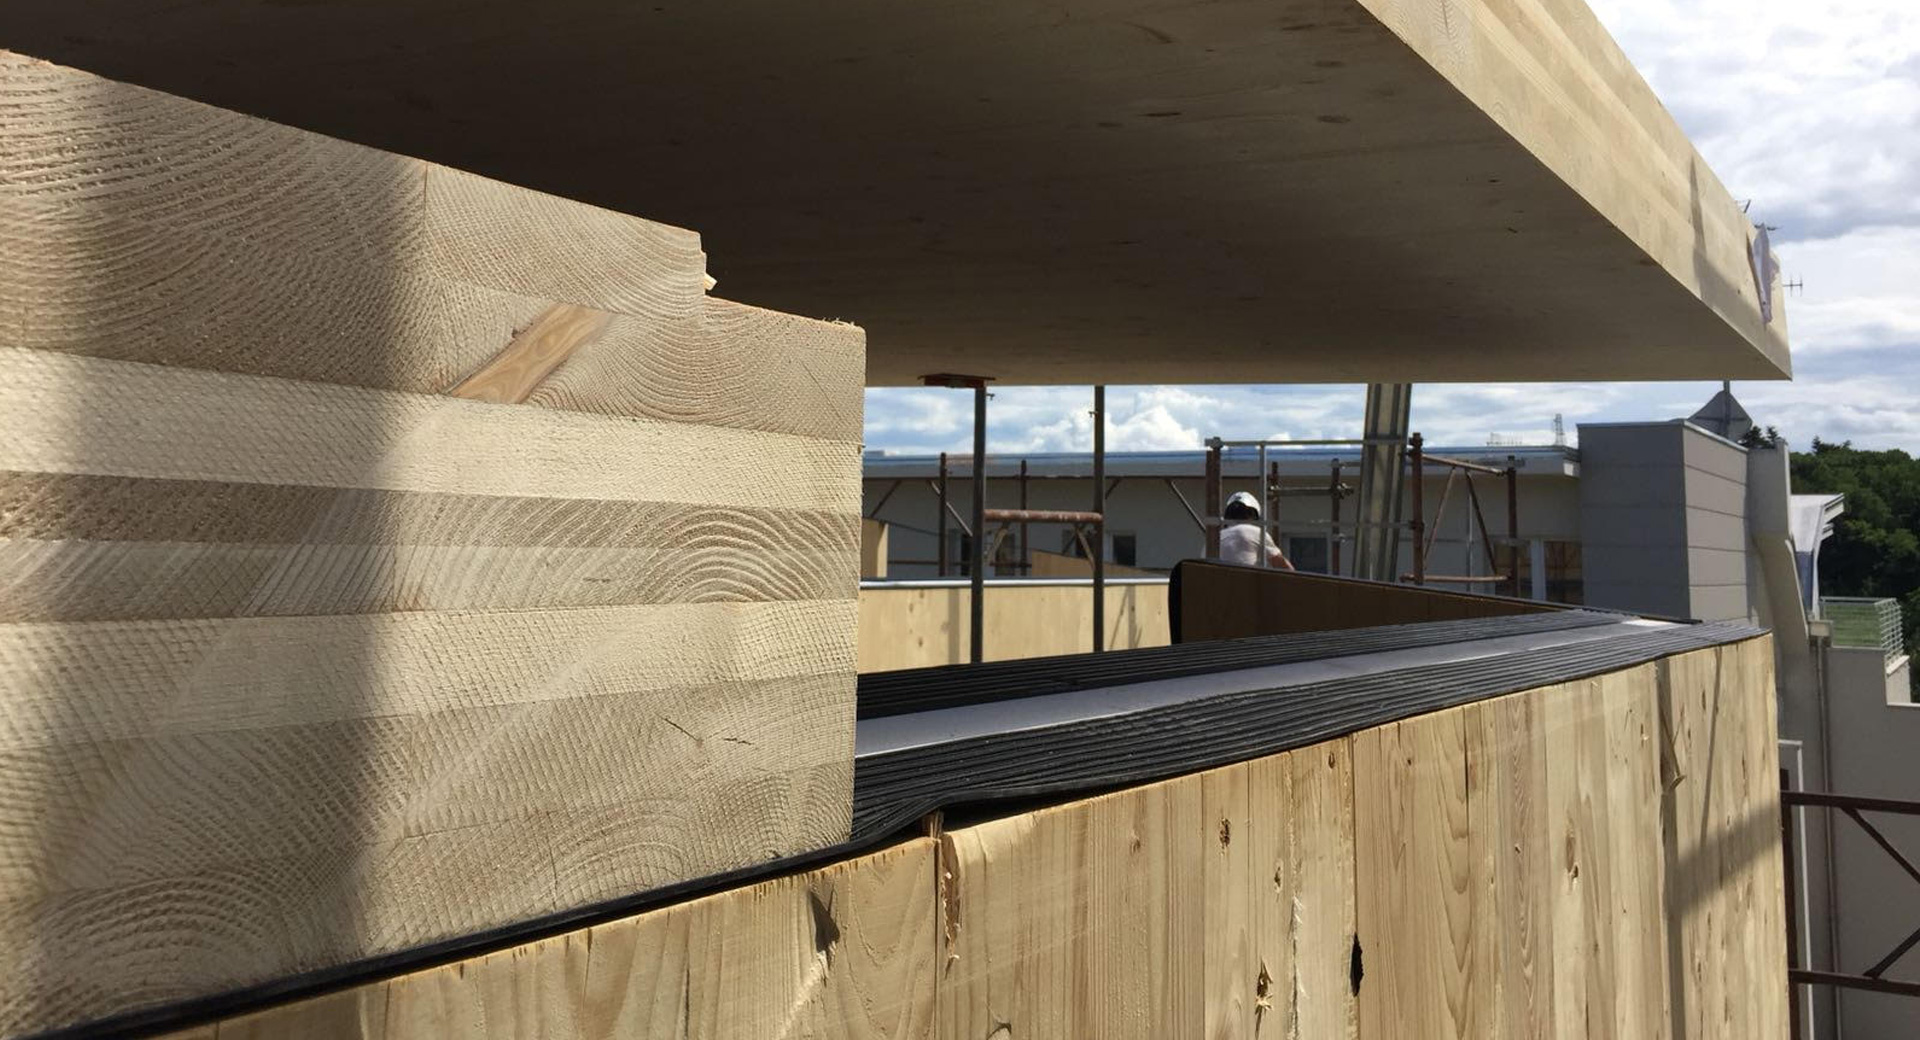 Wood buildings are the future of the sustainable environment